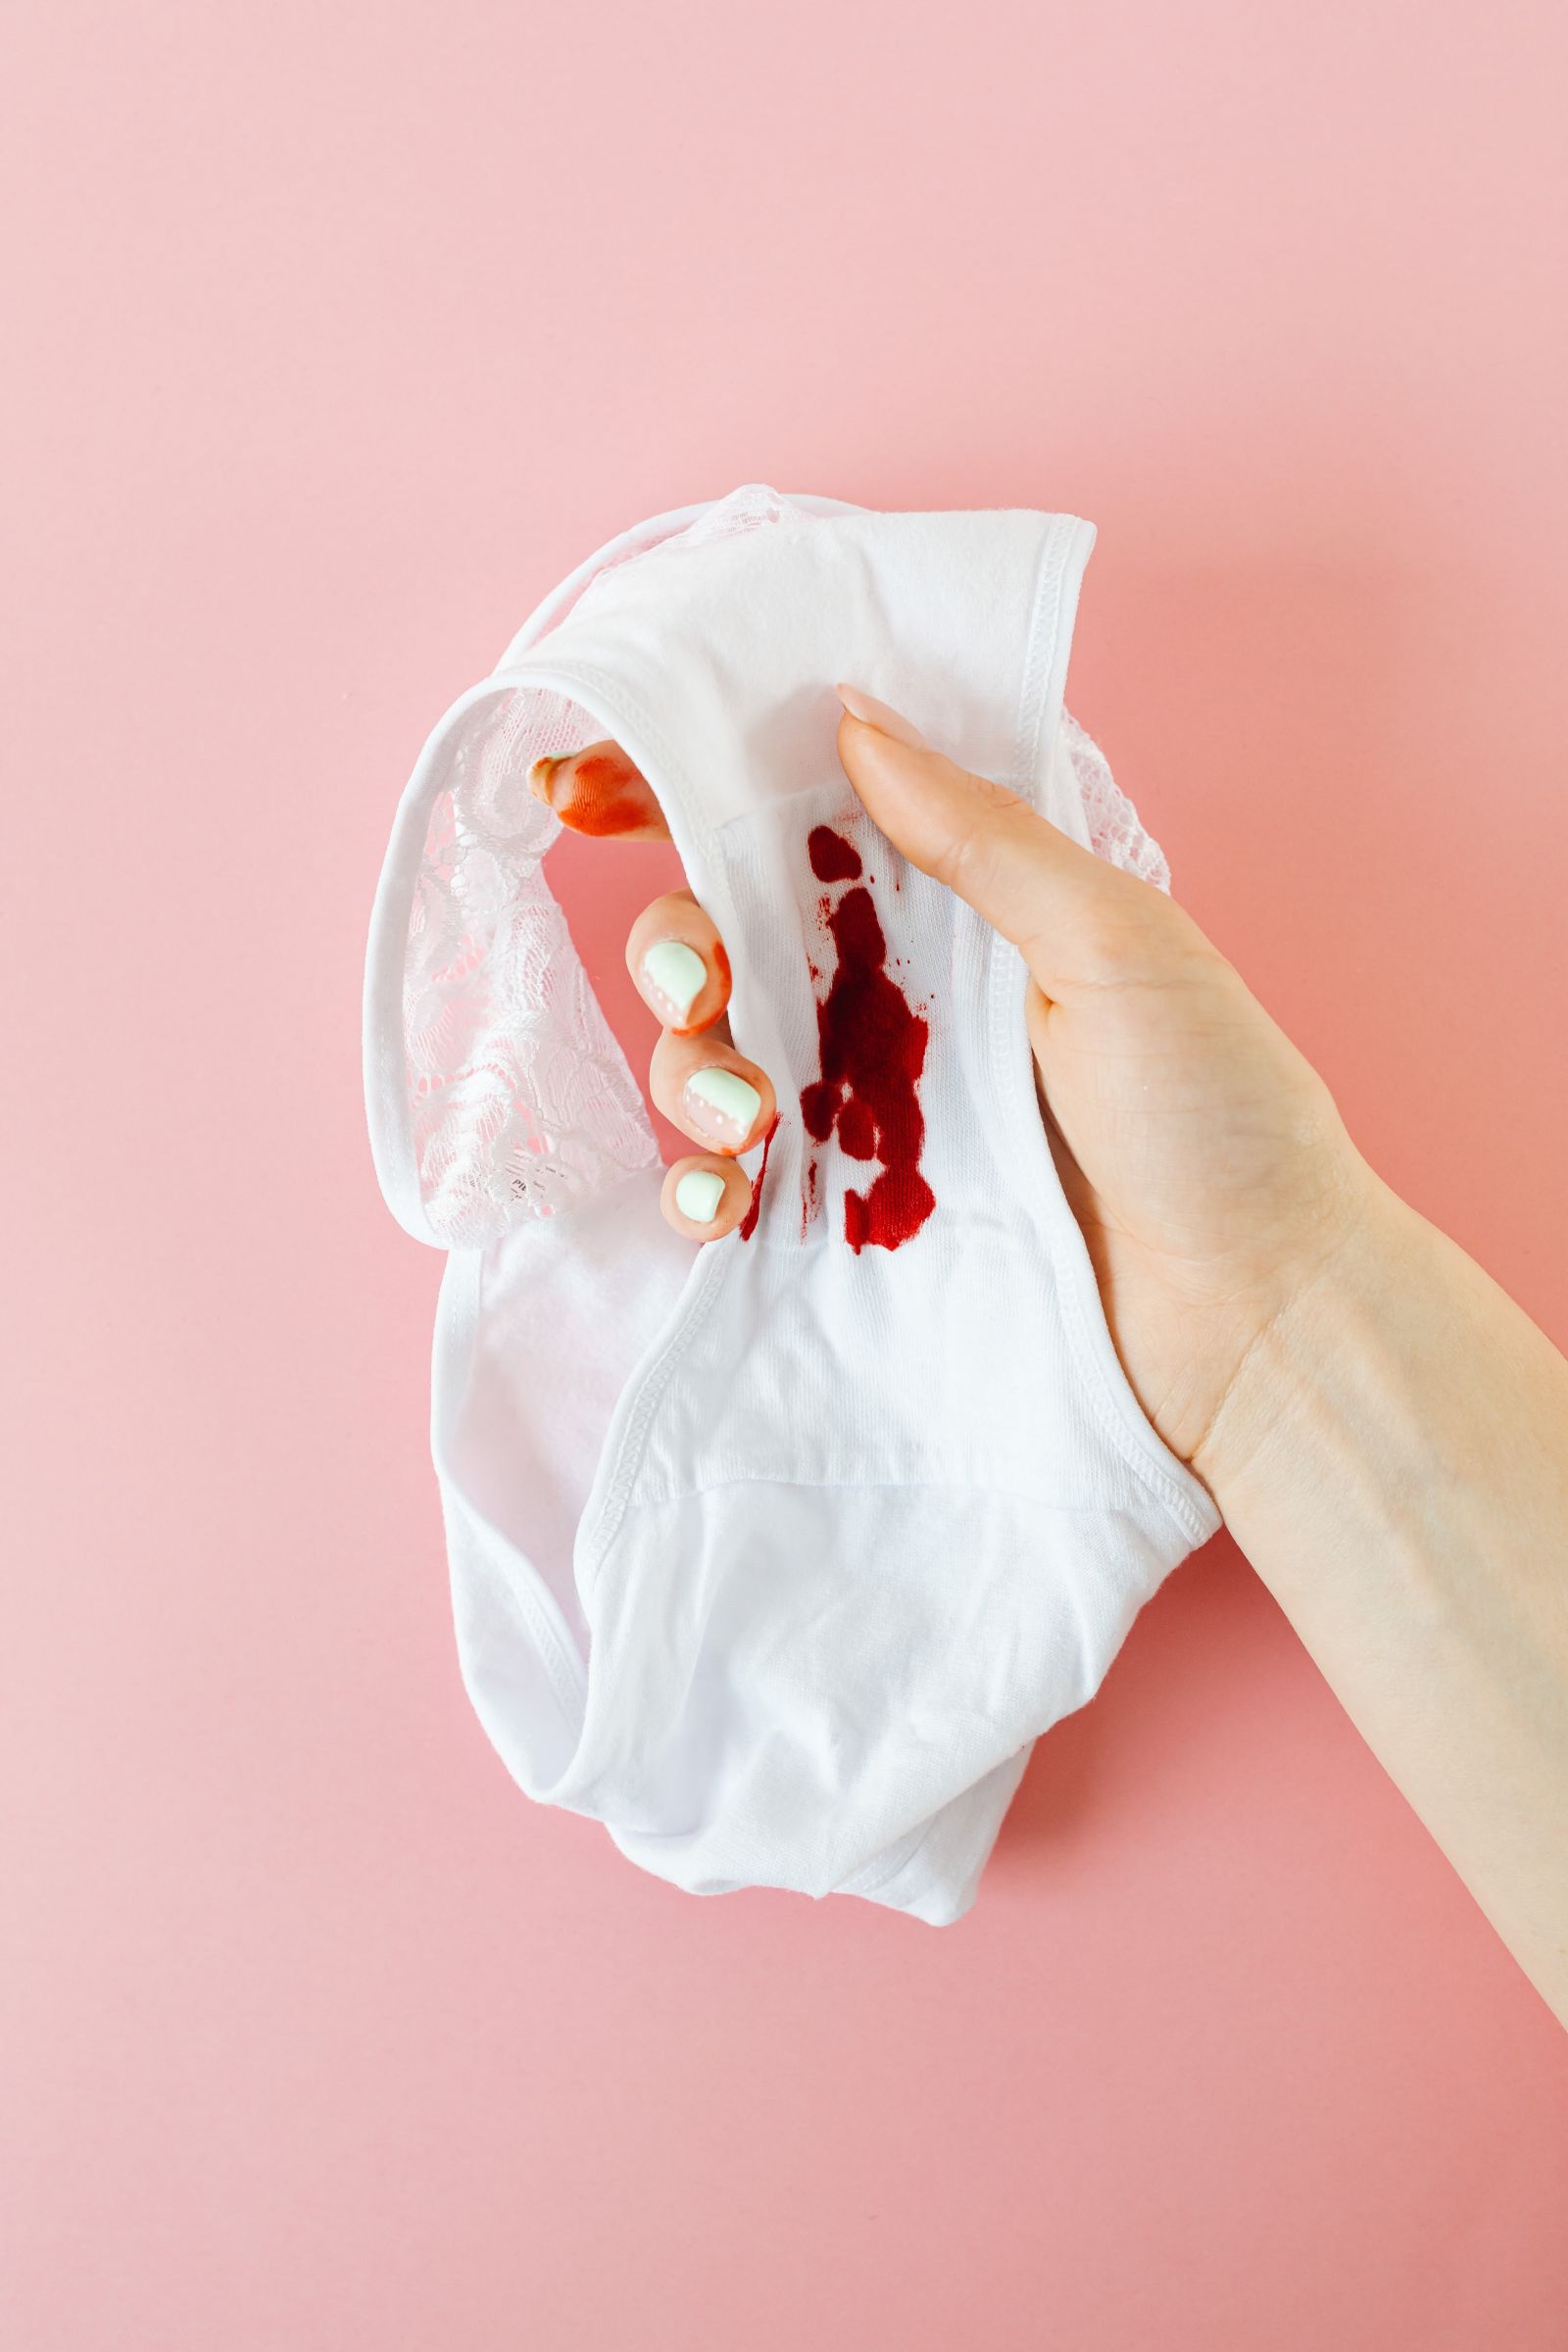 How to Combat Tampon Leaking & Starting Your Period Without